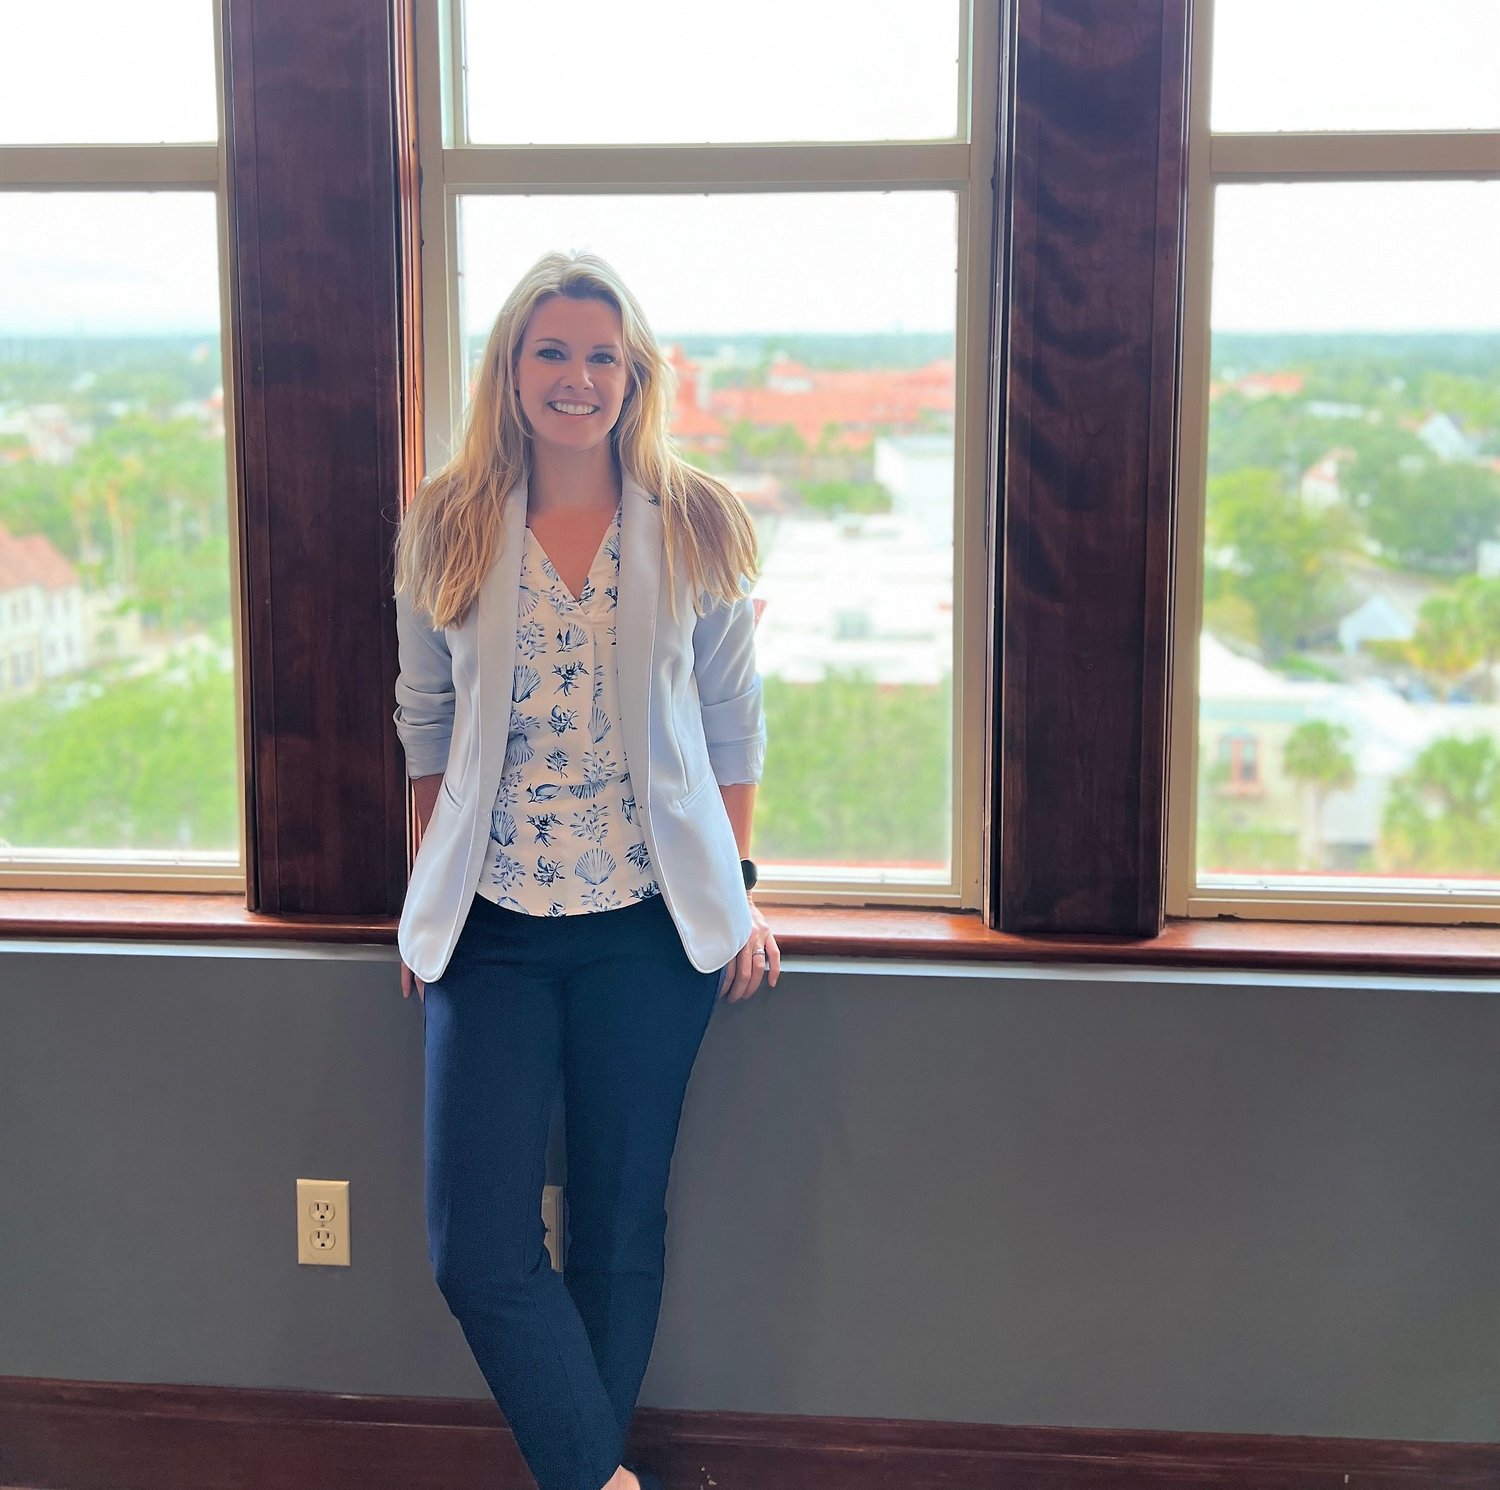 Stephanie Clarkson is president and chief executive officer of Vitis Energy, a St. Augustine-based independent power producer and clean energy solutions developer.